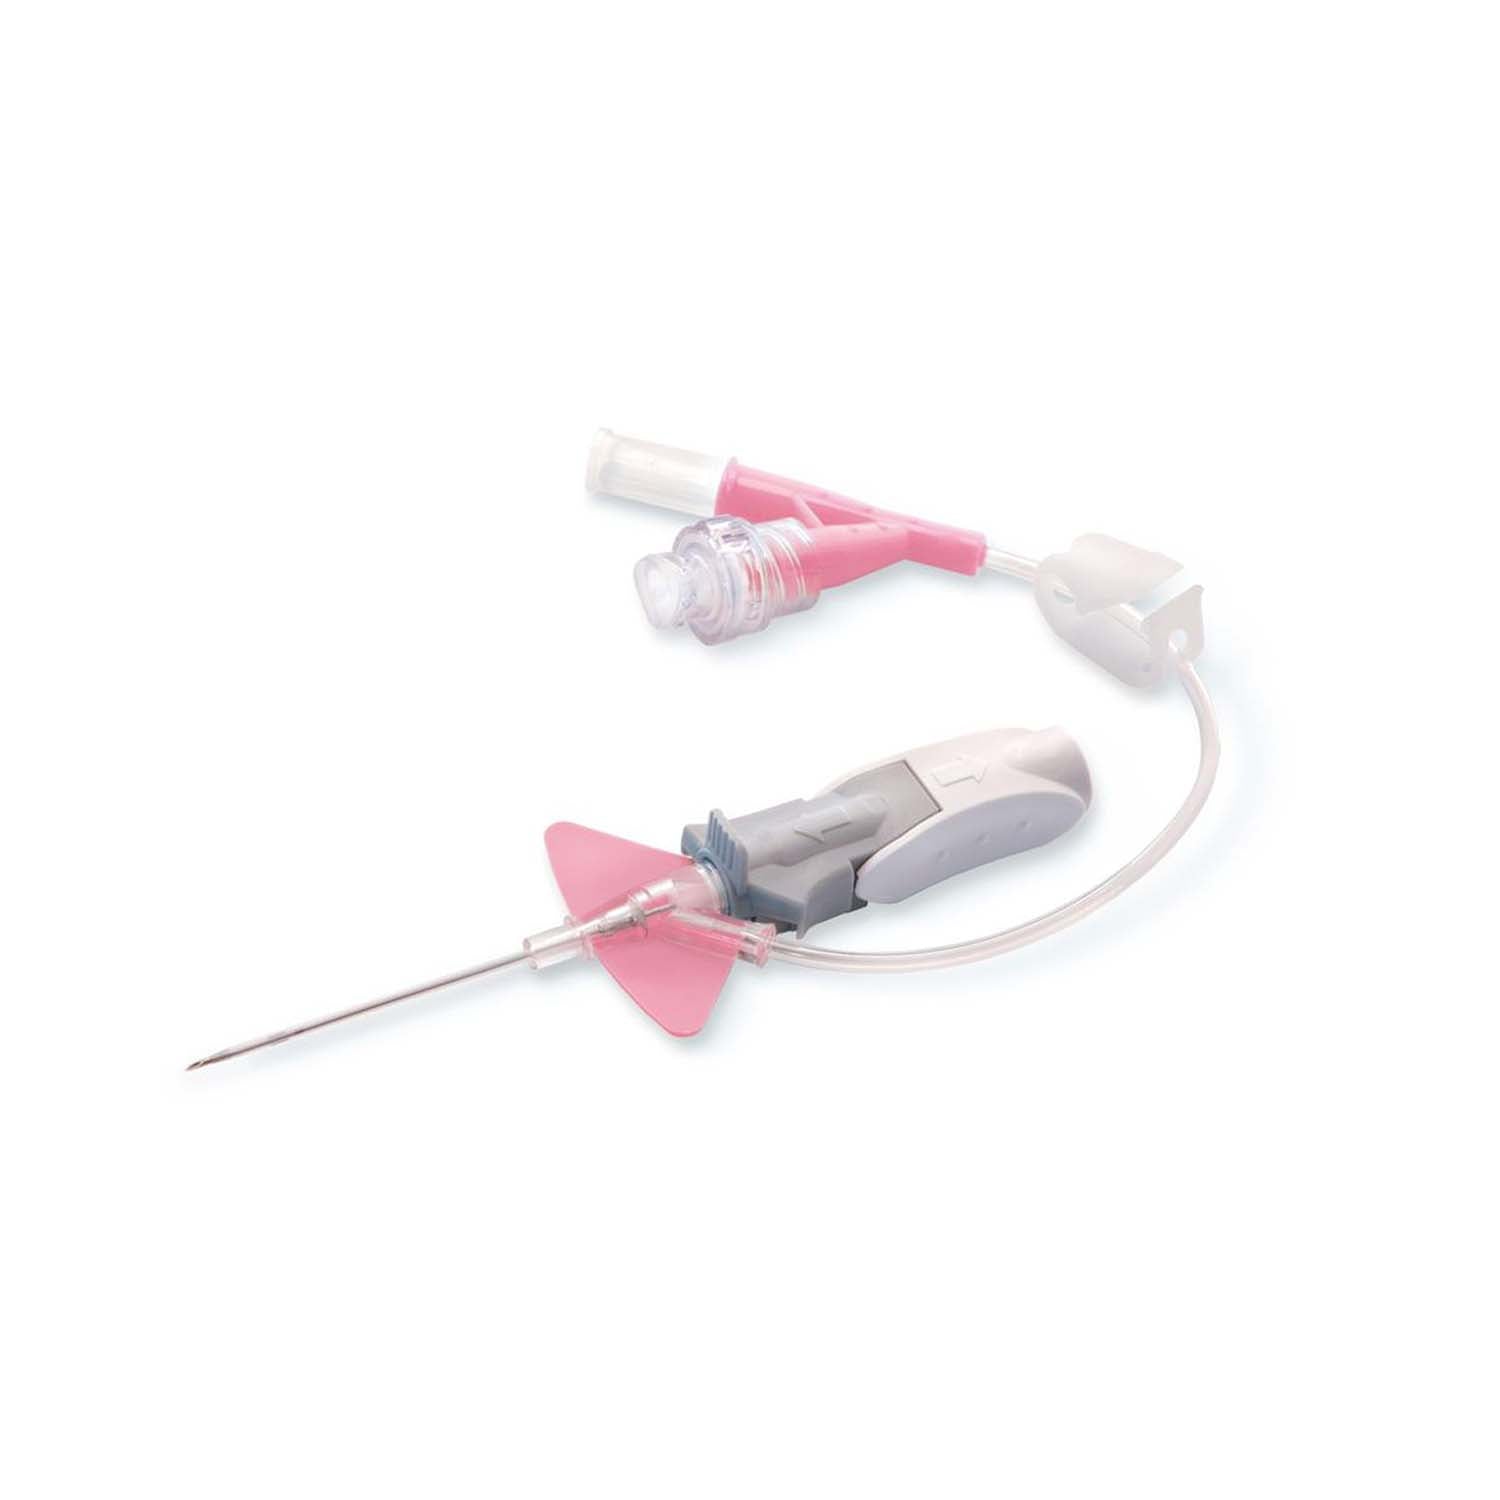 BD Nexiva Closed IV Catheter System | 22G x 1’’ | Pack of 20